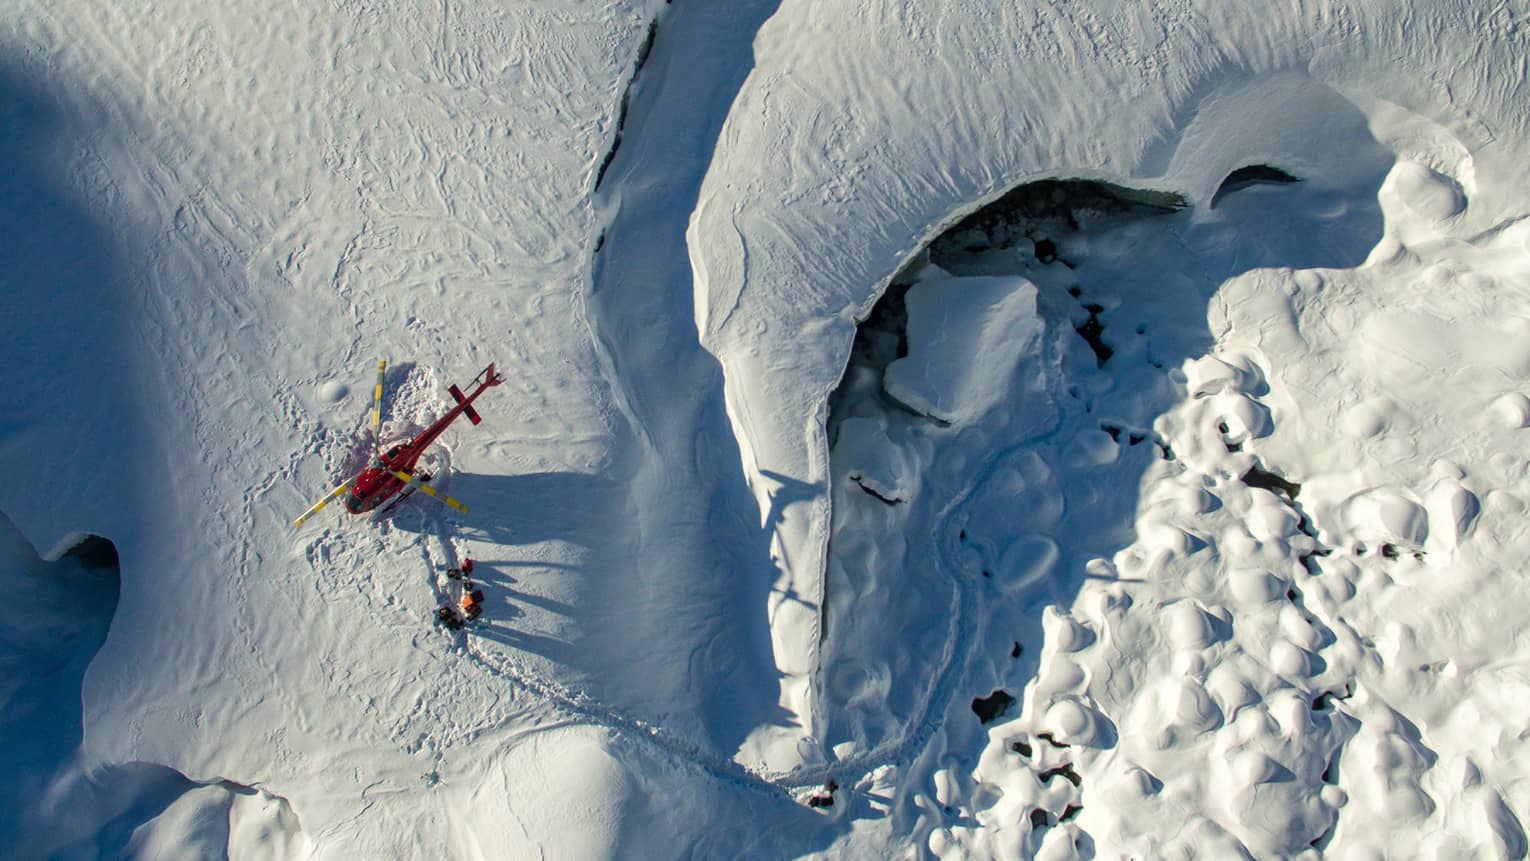 Aerial view of a red helicopter that's landed on a snow-covered mountain with three people walking near it